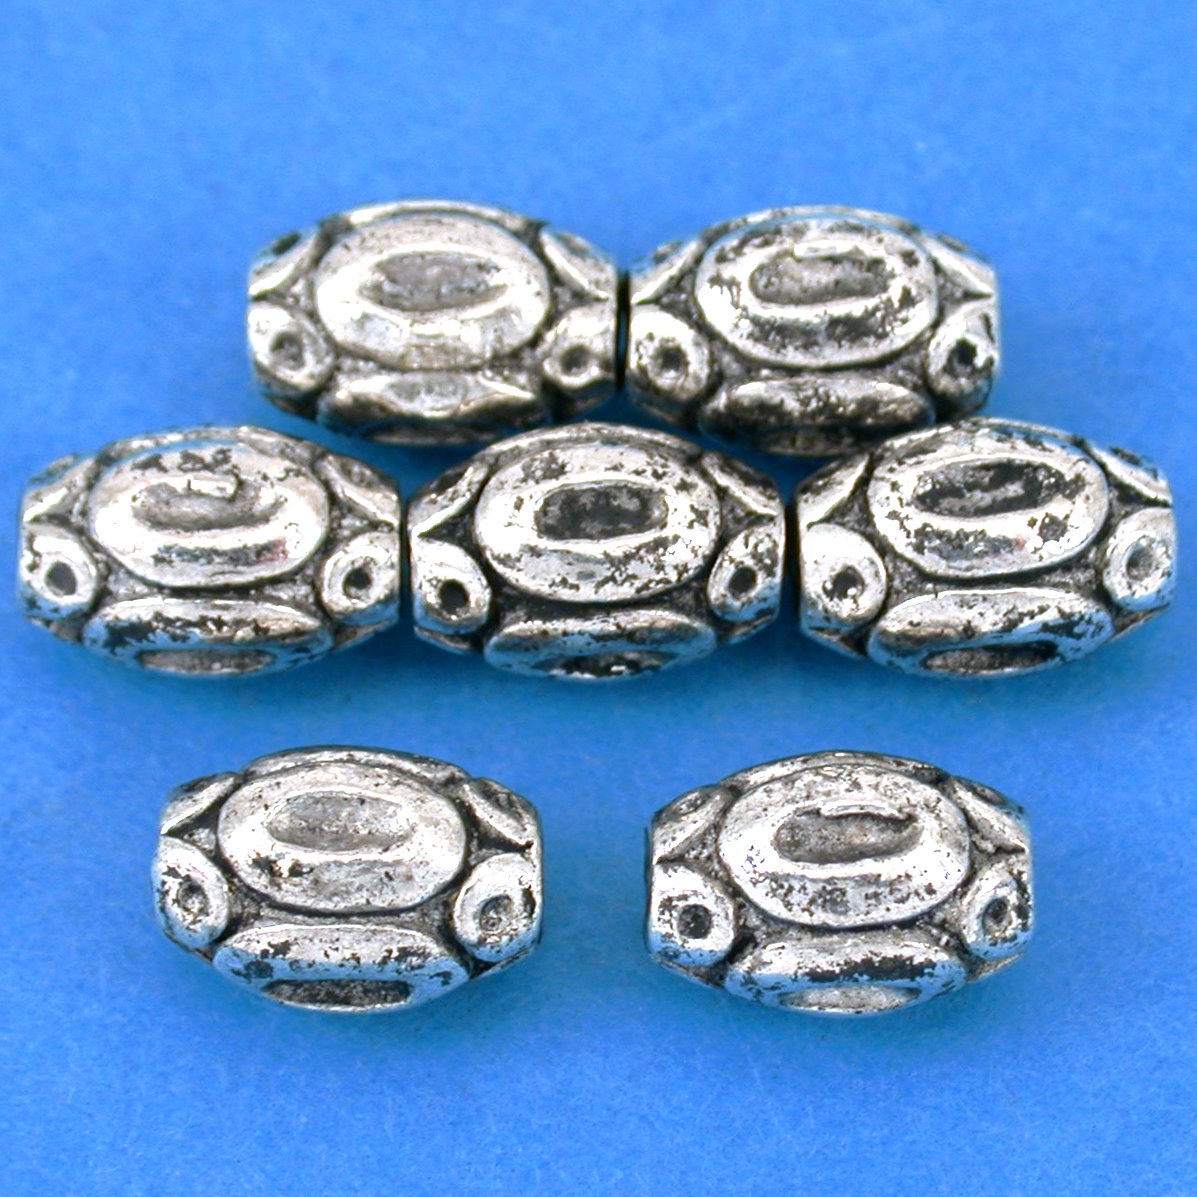 Bali Barrel Antique Silver Plated Beads 11mm 15 Grams 7Pcs Approx.